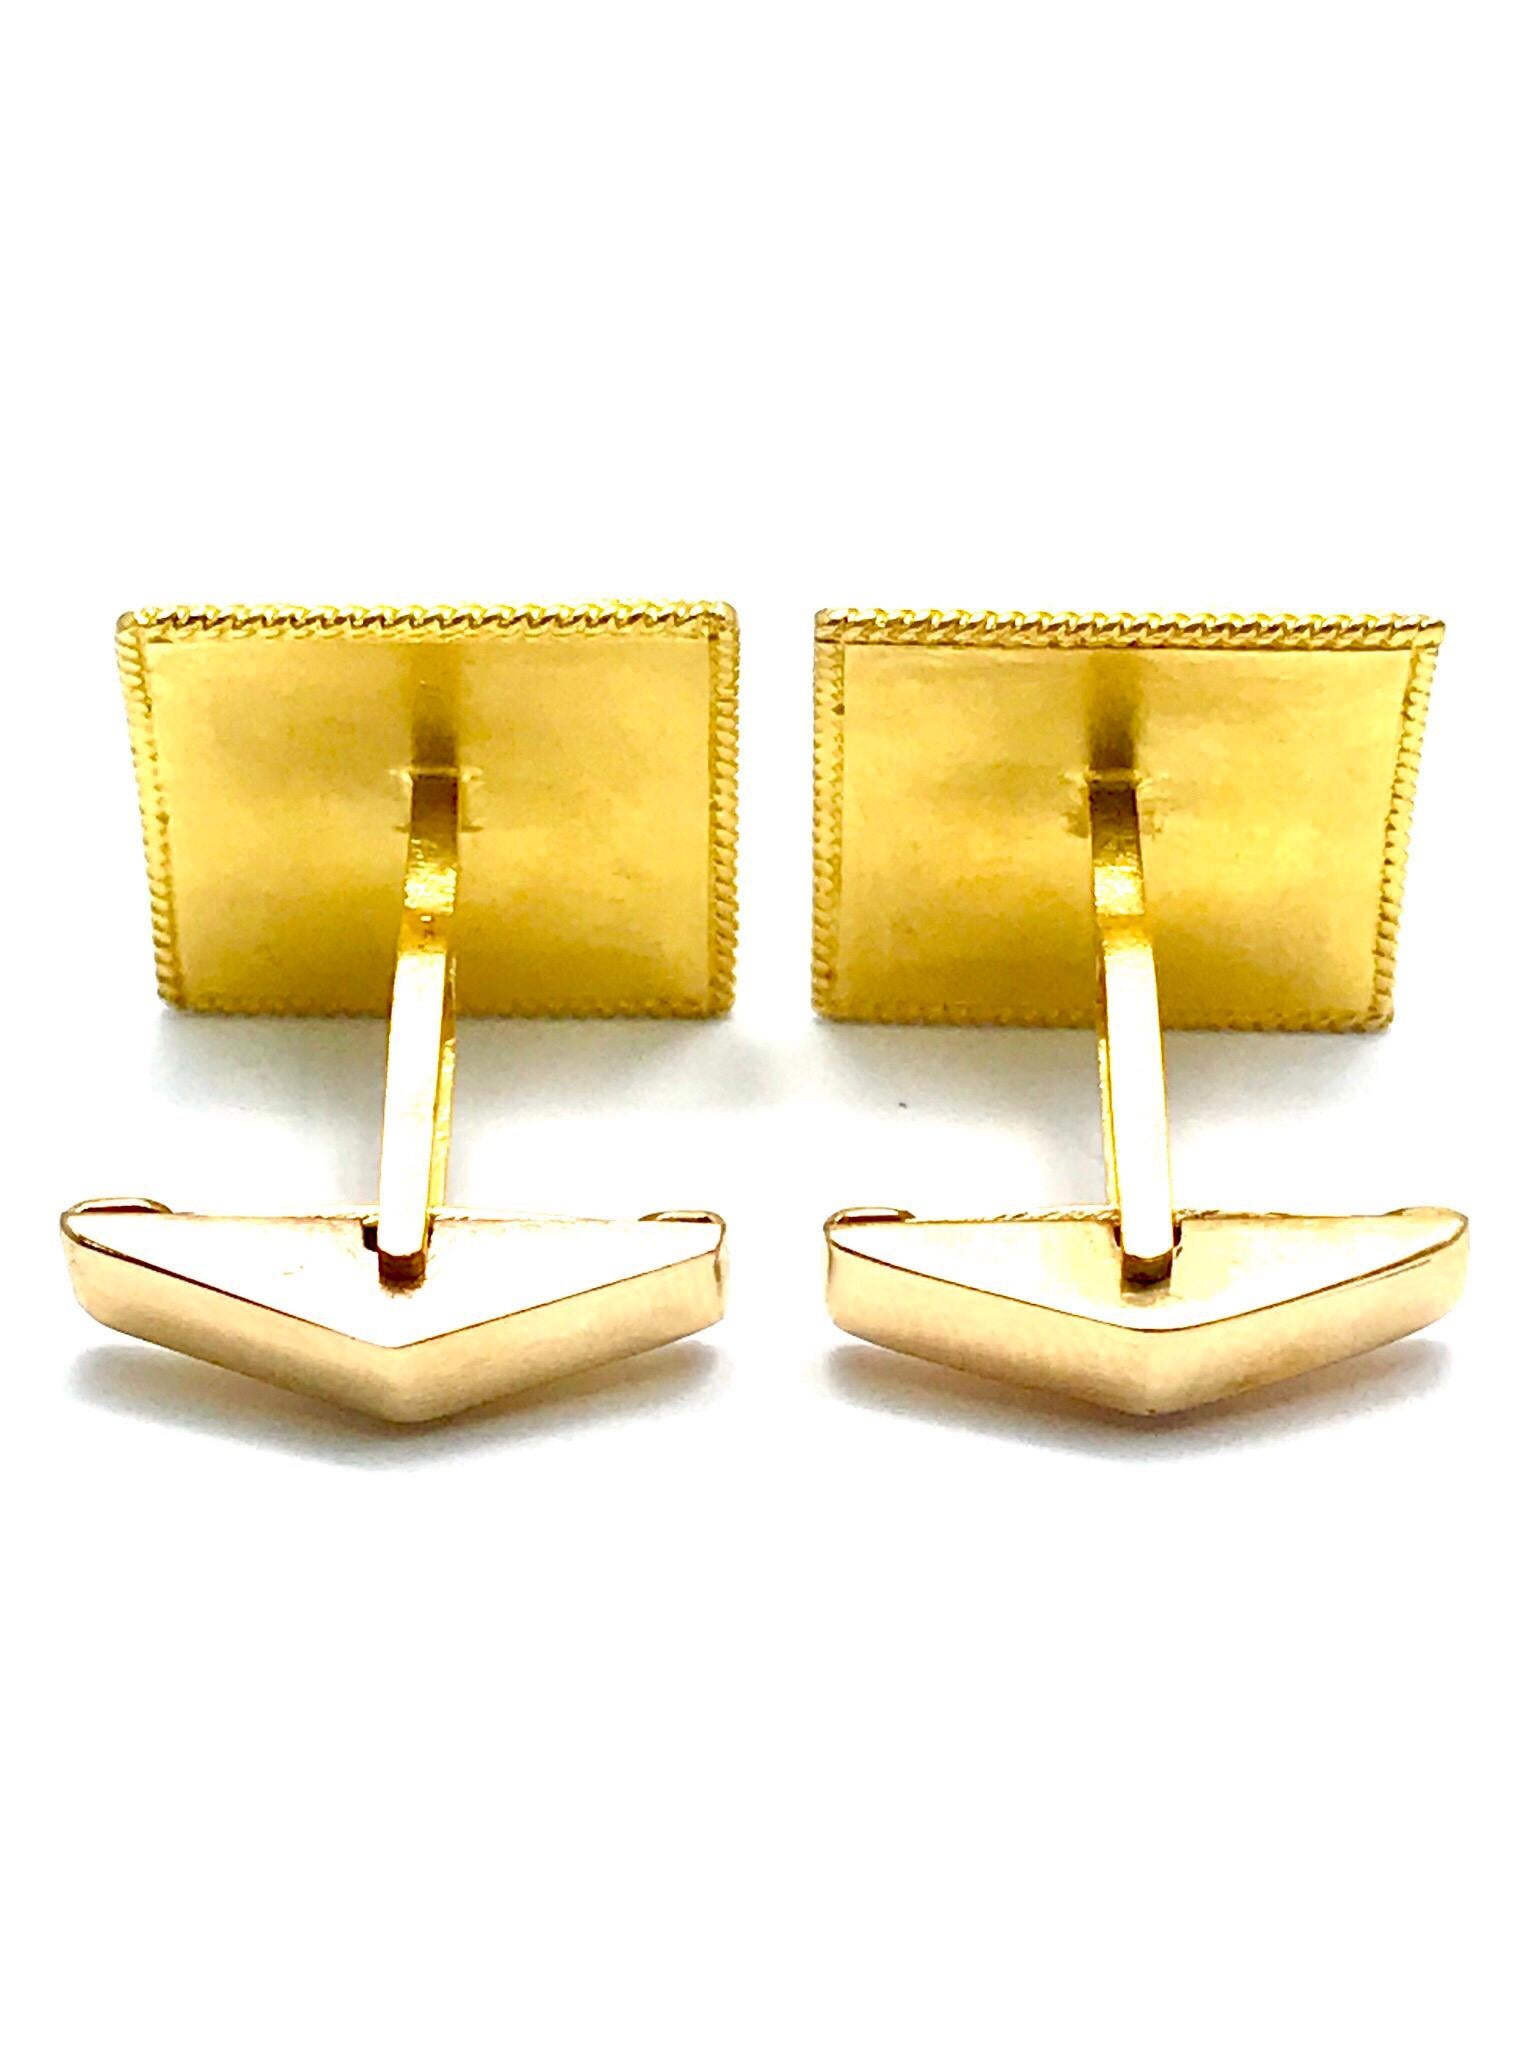 Women's or Men's Turquoise and 18 Karat Yellow Gold Cufflinks with a Toggle Back